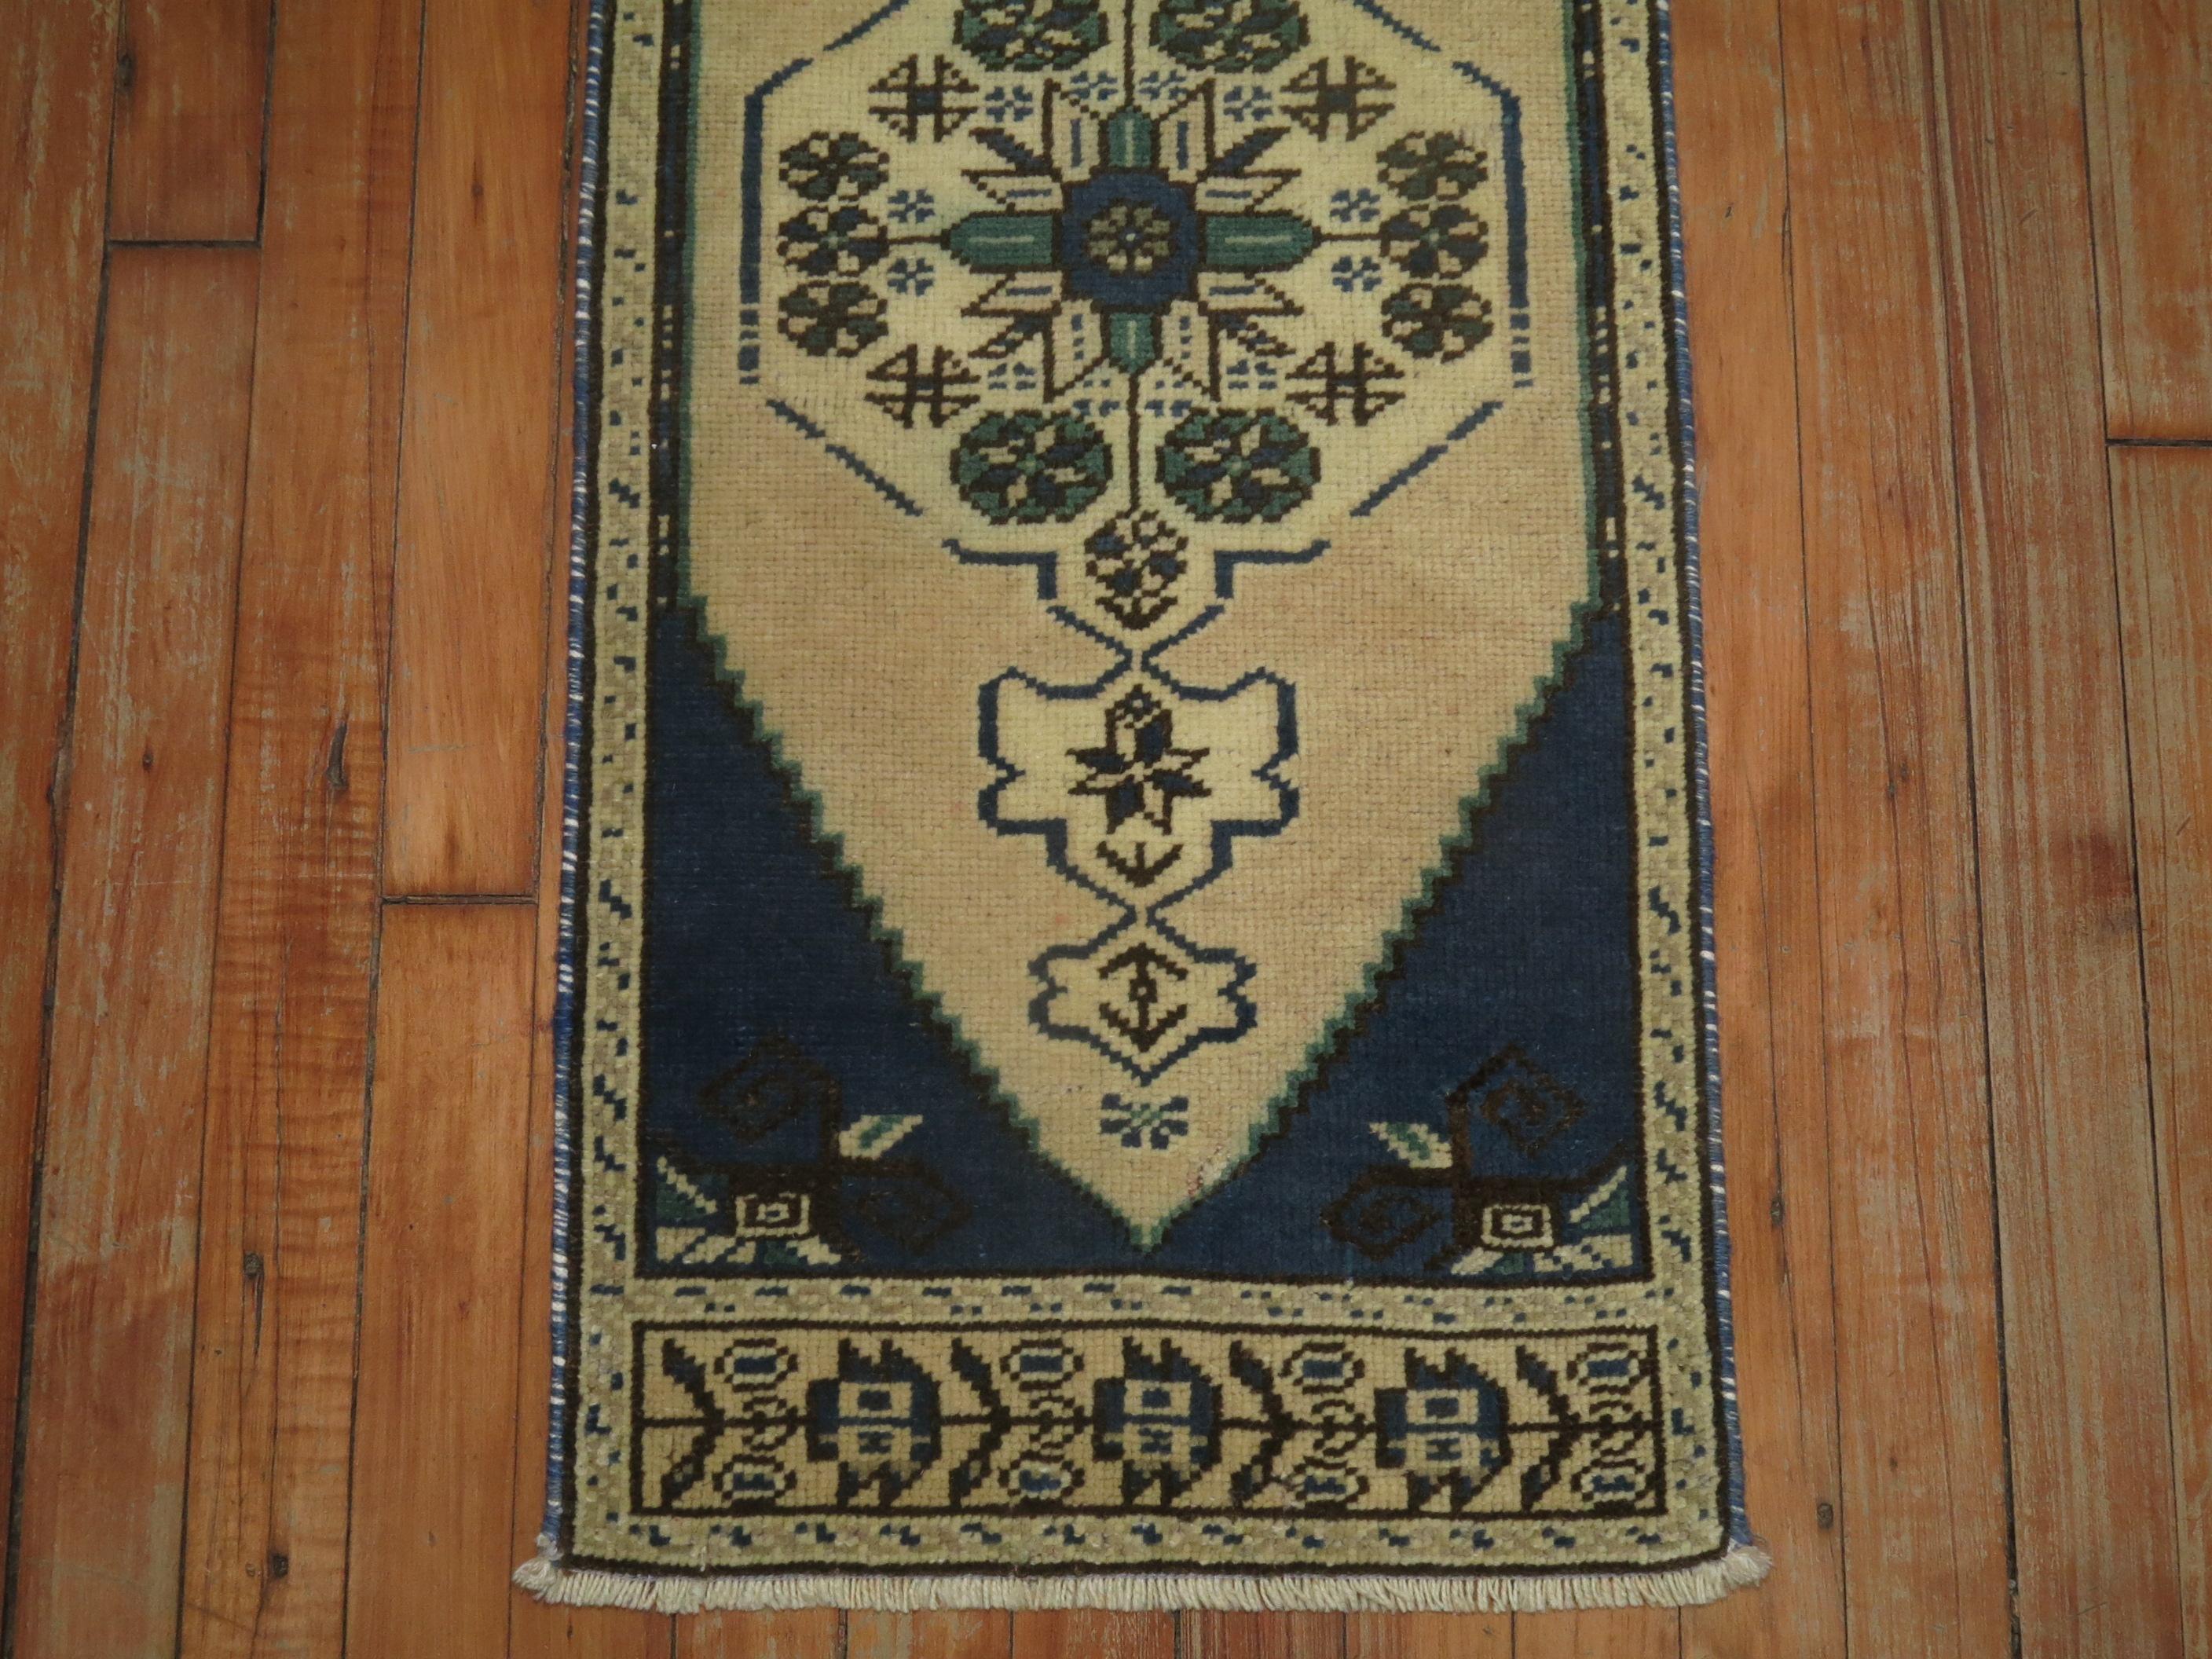 A one of a kind vintage Turkish rug with a deep blue accent you don't typically find in older Turkish rugs.